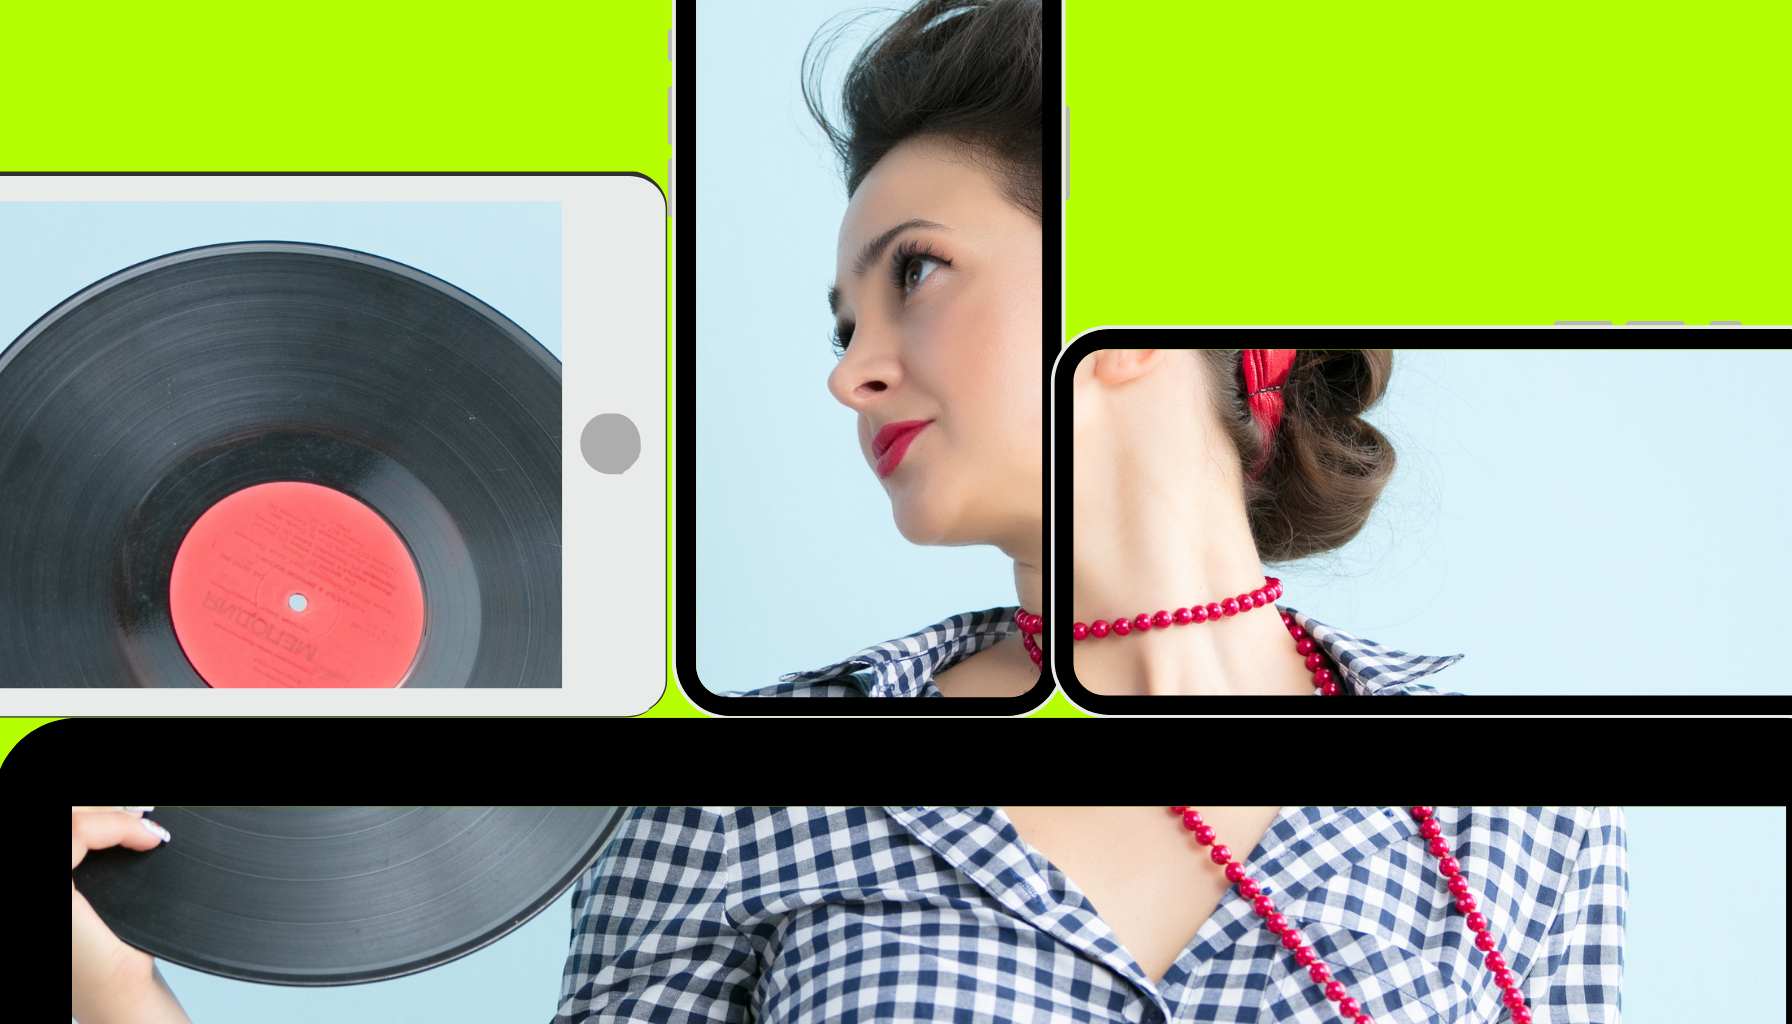 girl in a music ad on multiple mobile phone, table, and desktop screens, posing with a record. green background